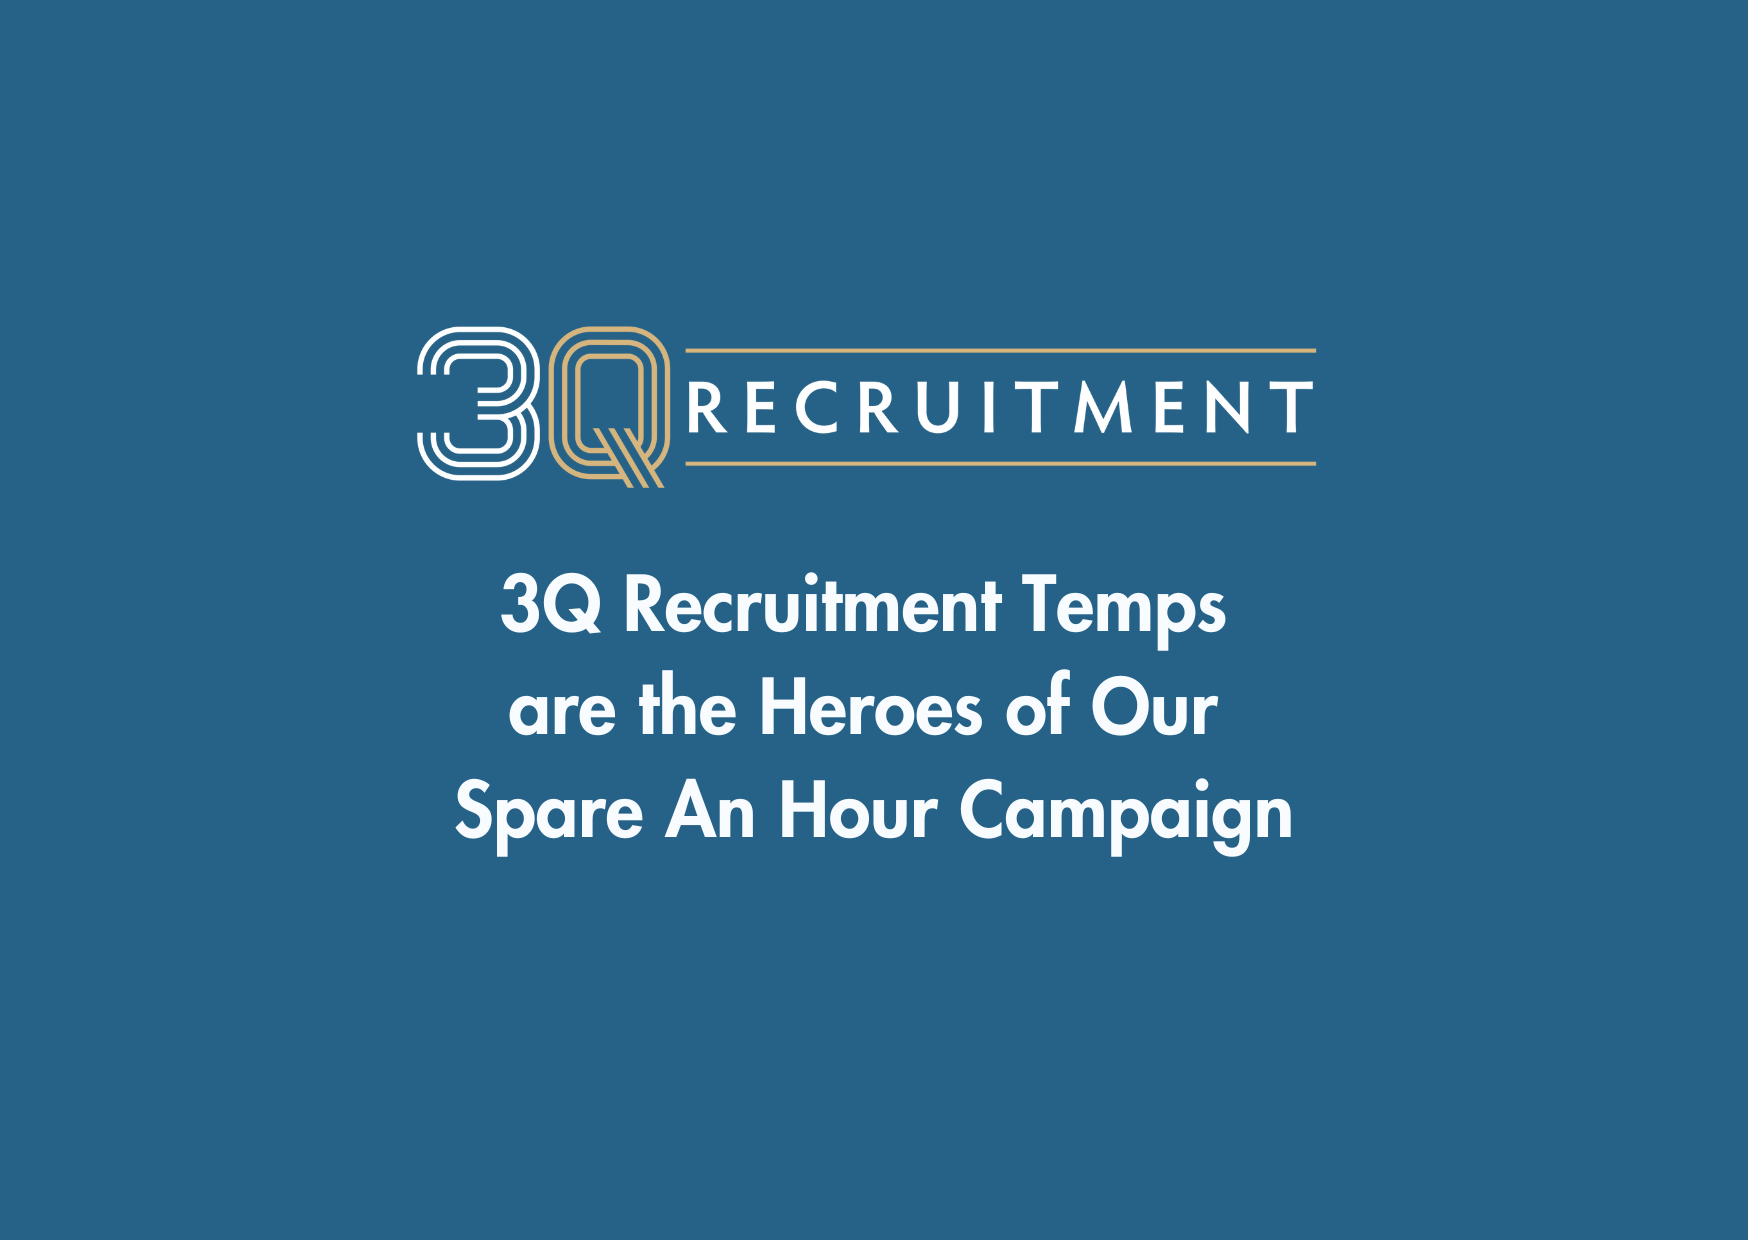 3Q Recruitment Temps are the Heroes of Our Spare An Hour Campaign